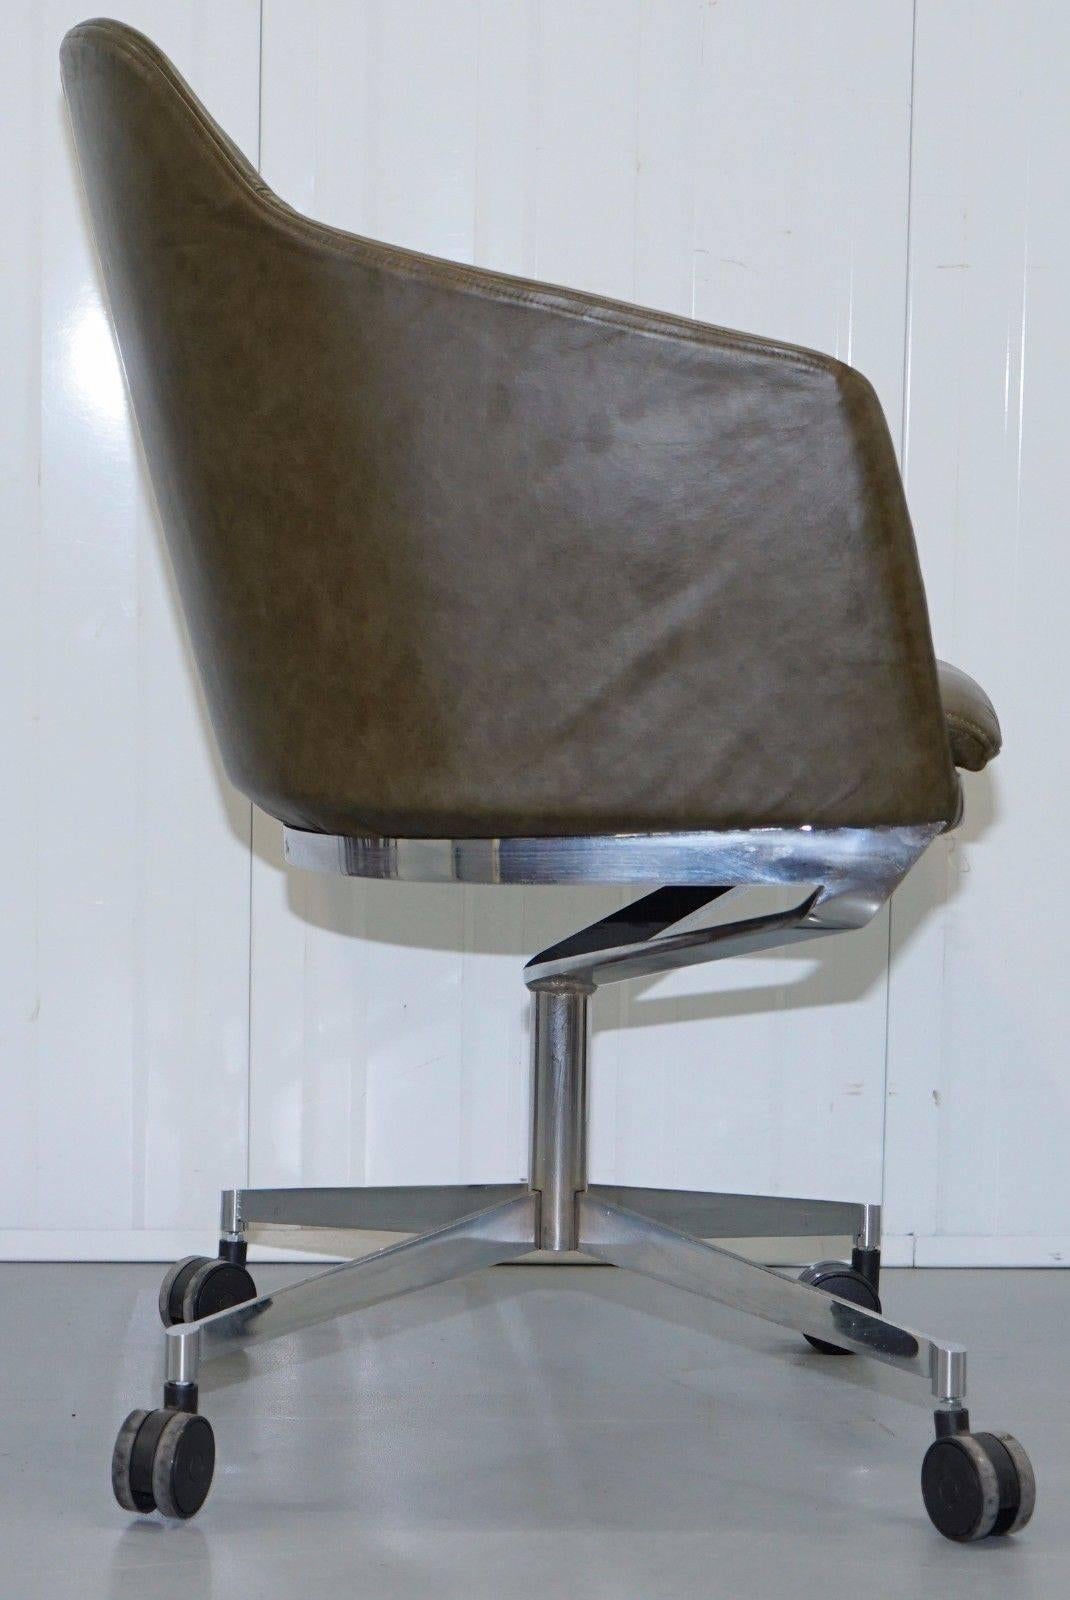 1 of 2 Retro Aged Green Heritage Leather Office Captains Chairs Chrome 3